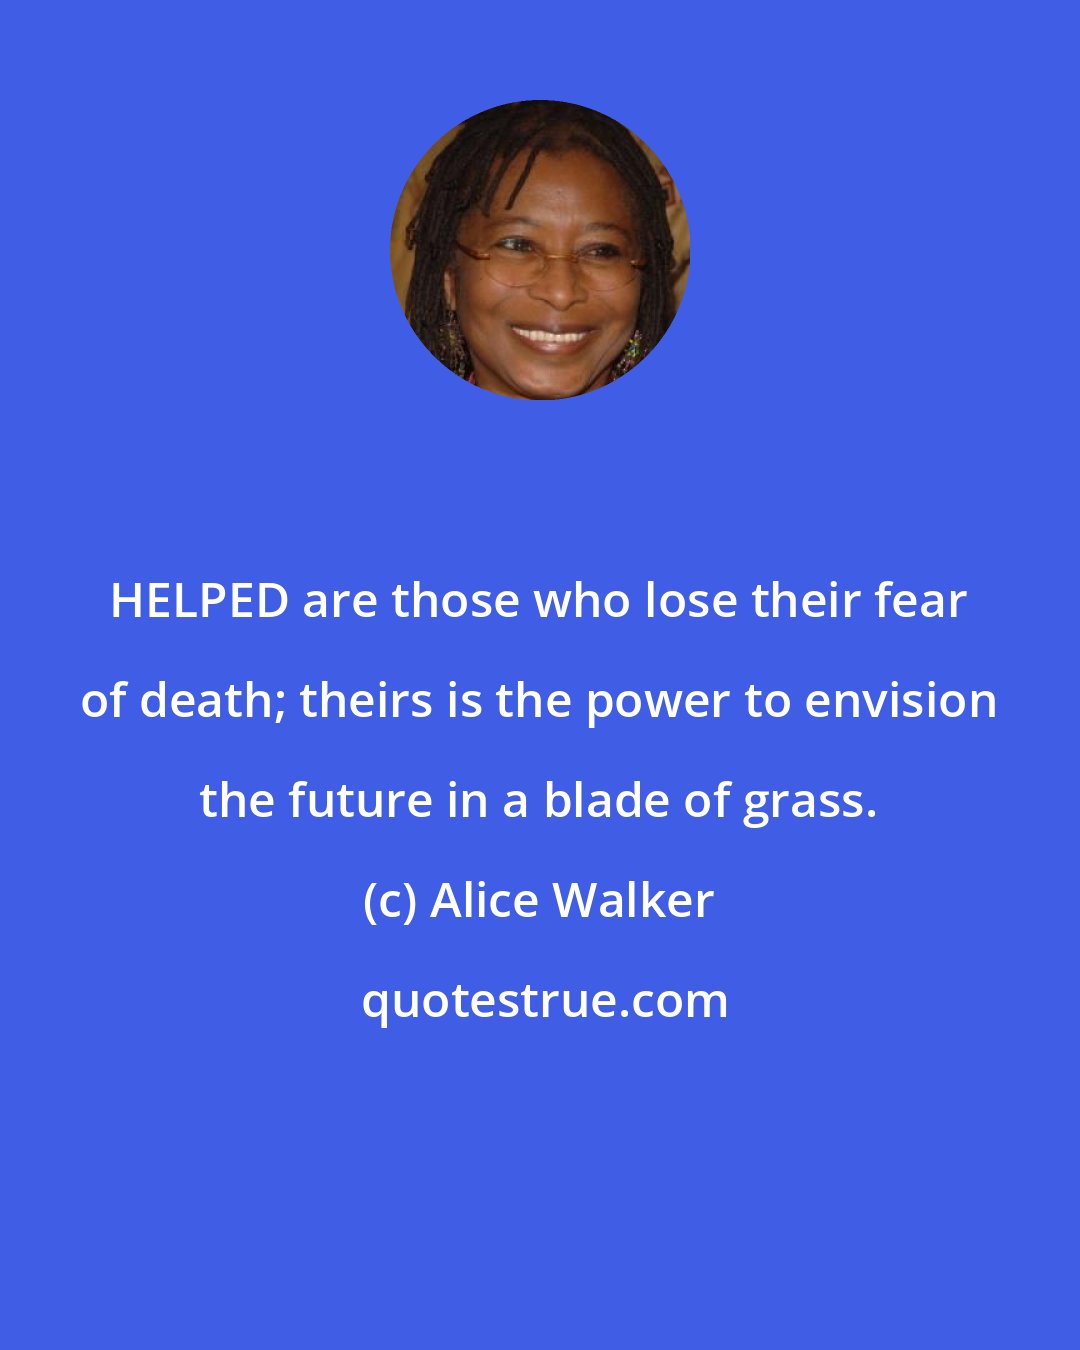 Alice Walker: HELPED are those who lose their fear of death; theirs is the power to envision the future in a blade of grass.